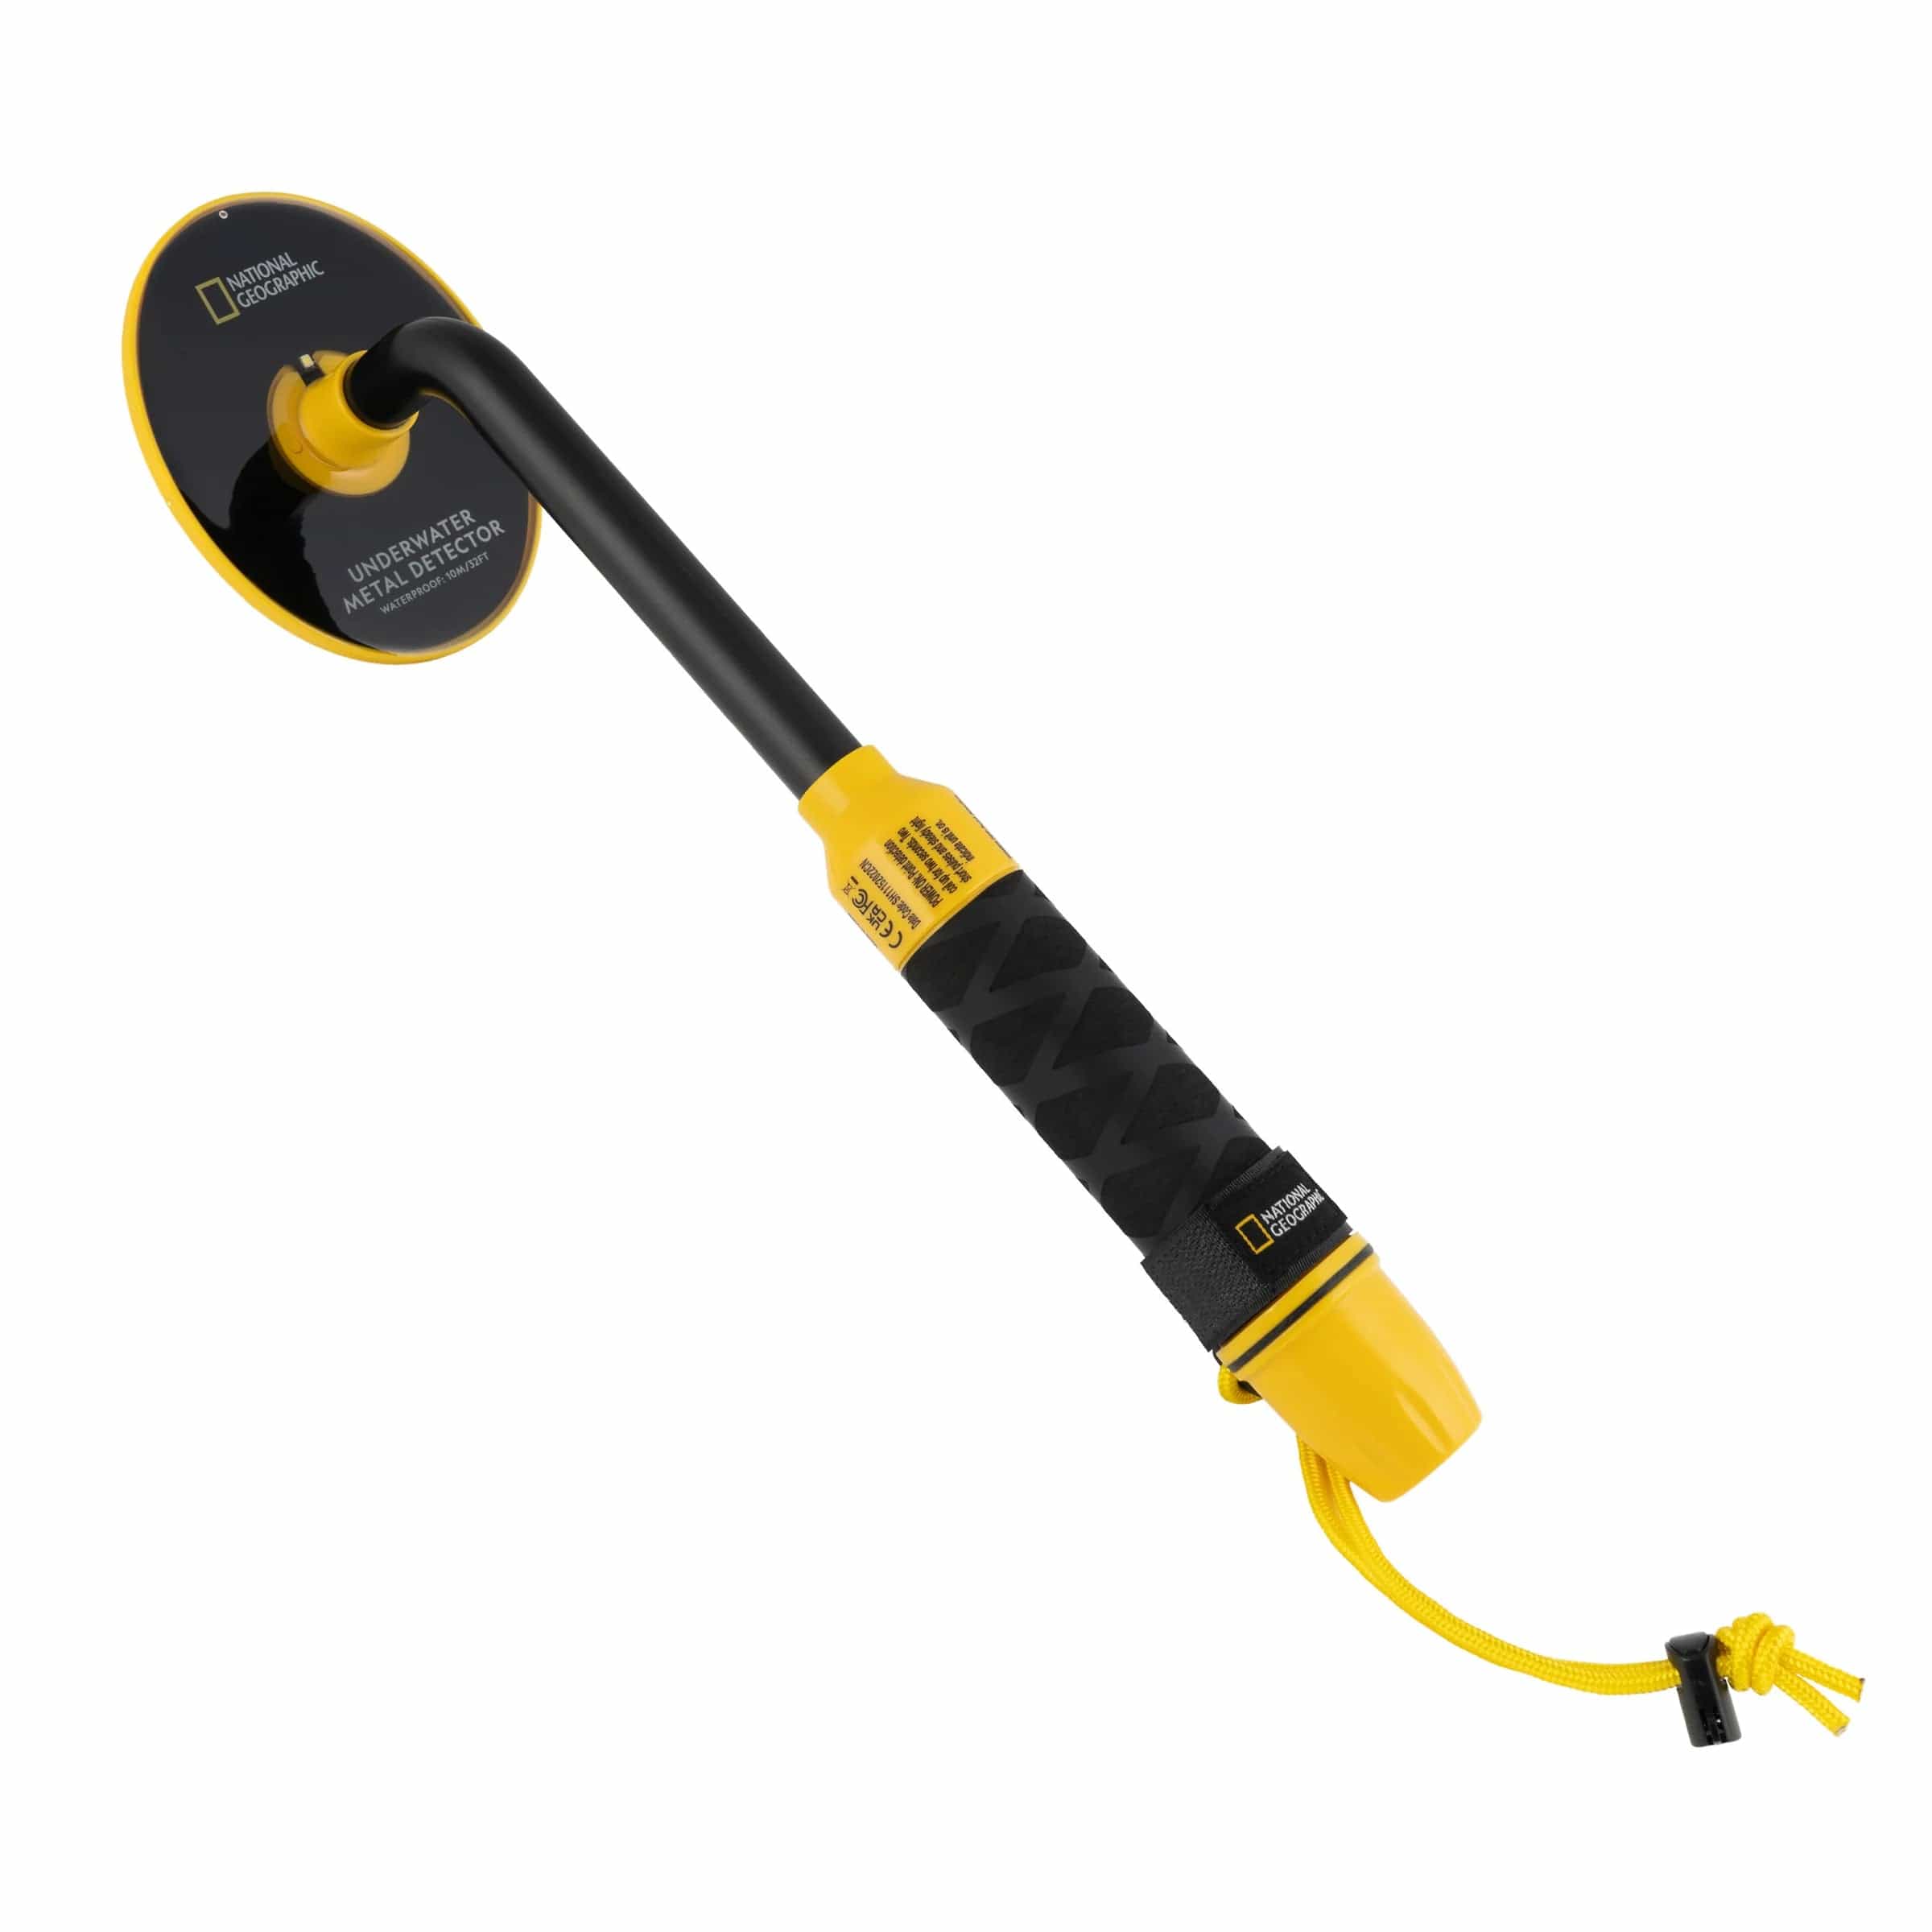 National Geographic Accessory National Geographic Underwater Metal Detector - 80-20010